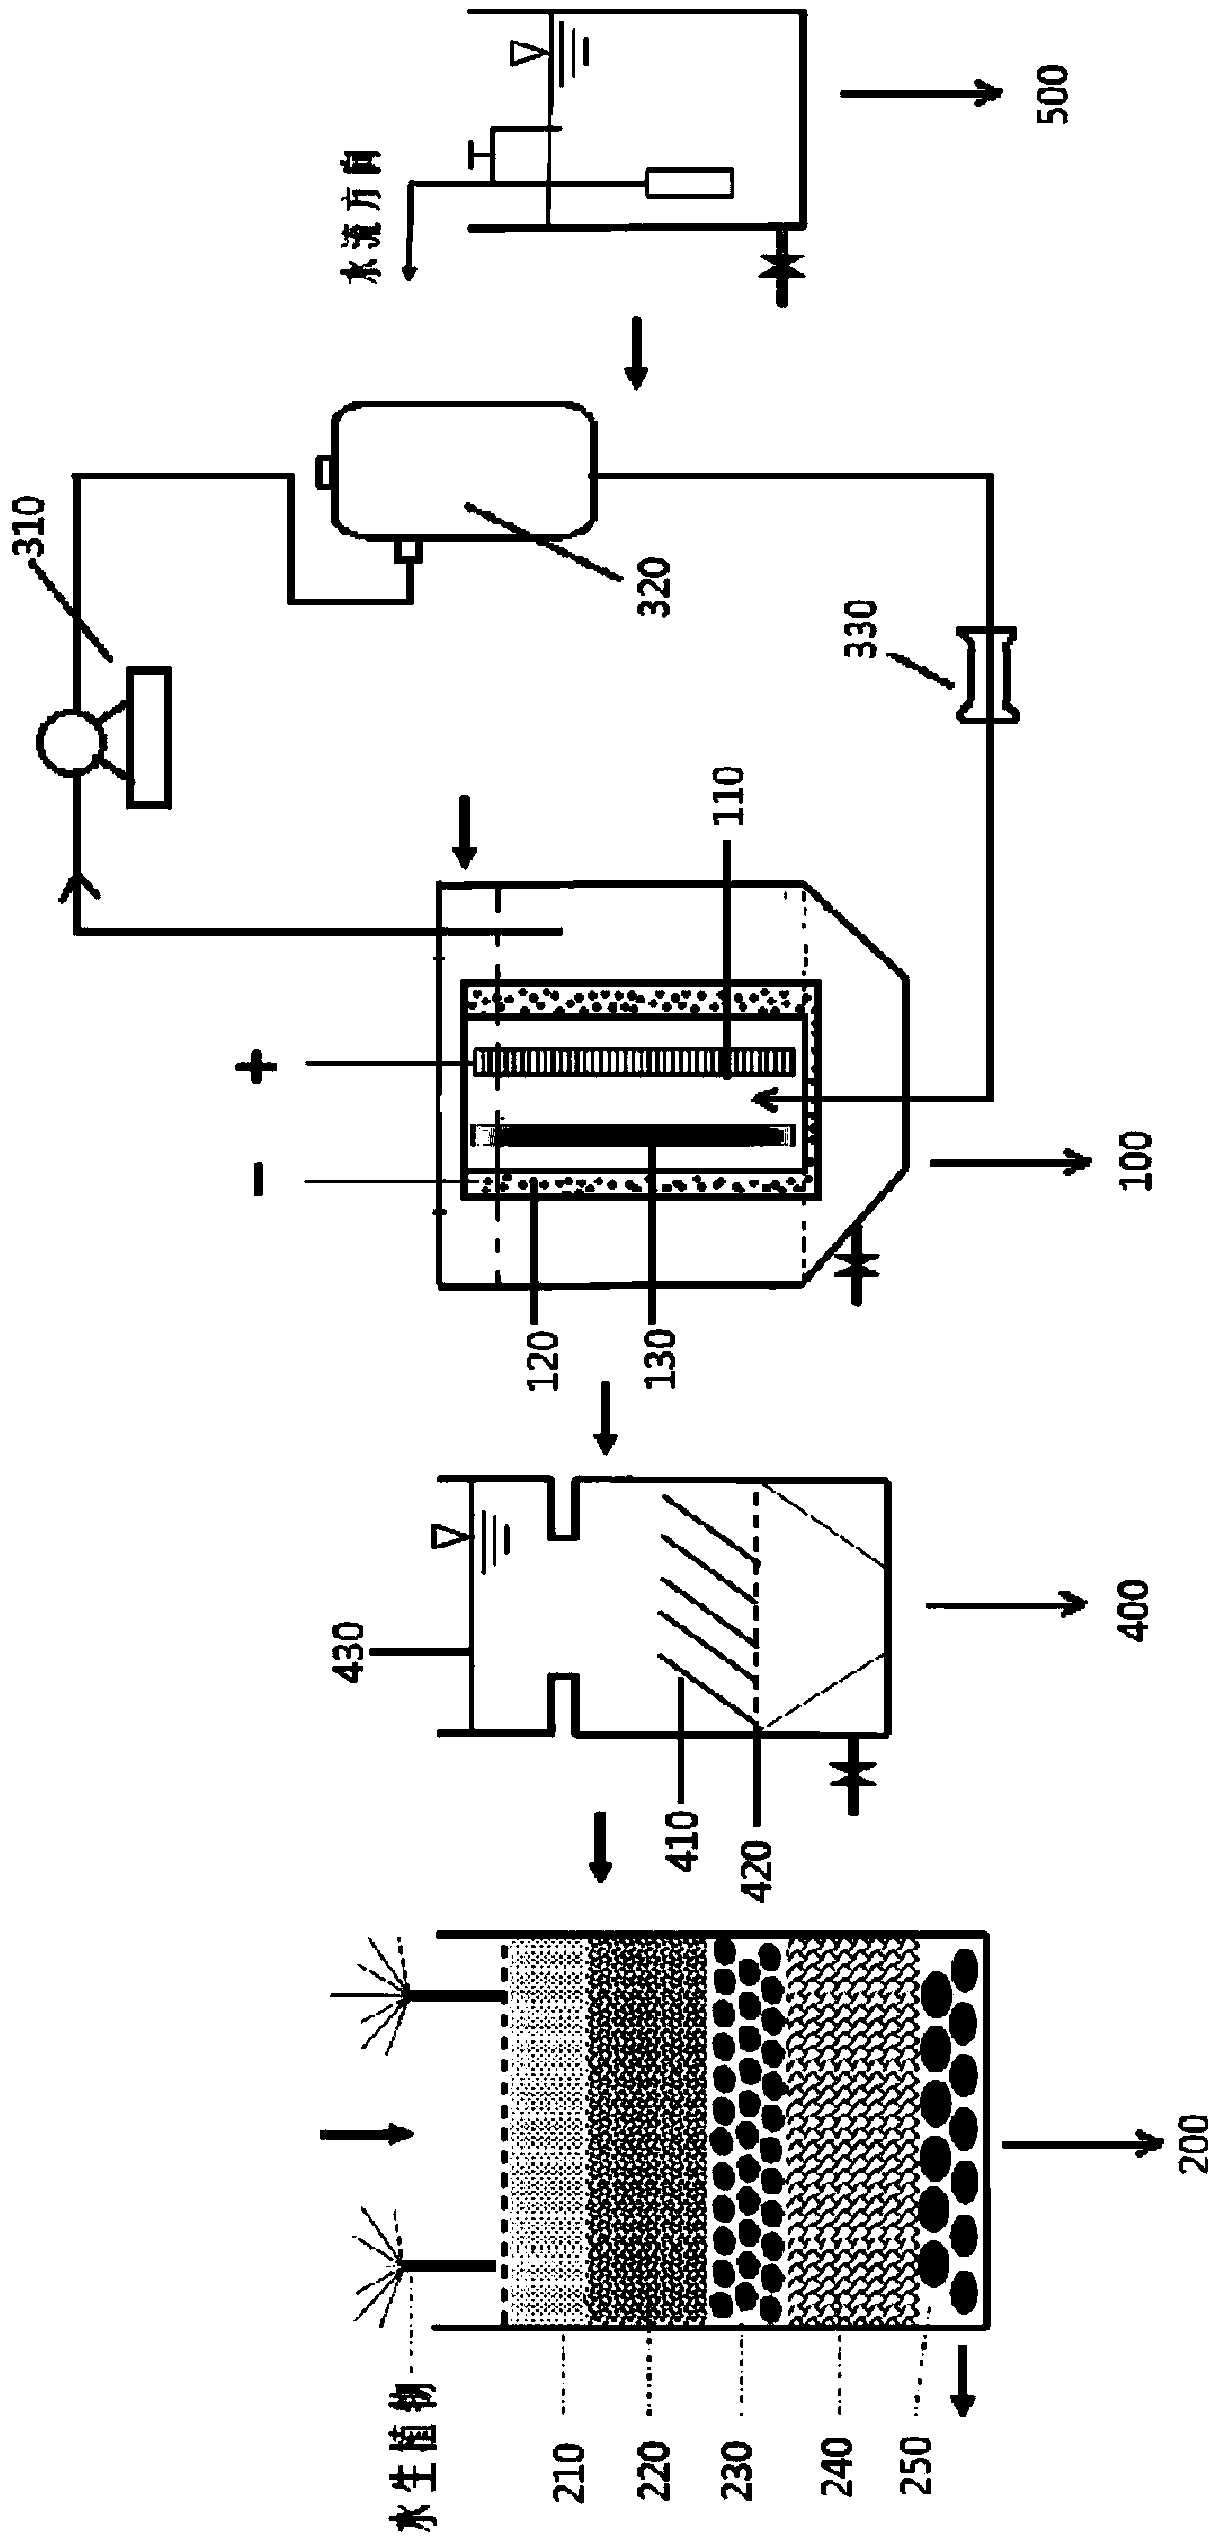 Method and system for deeply treating leachate